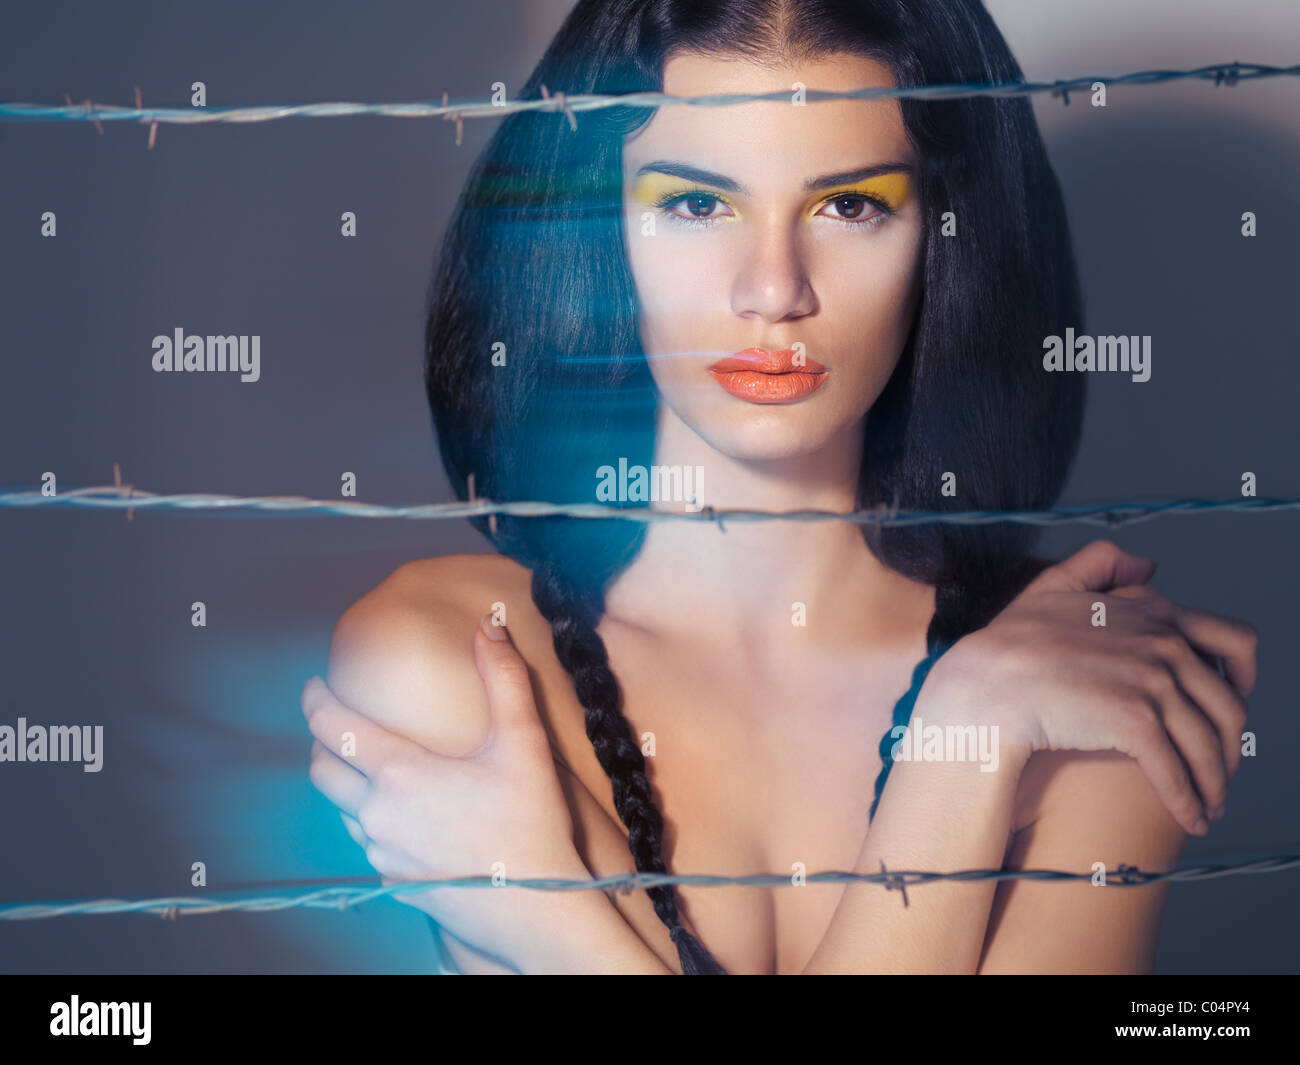 Artistic expressive beauty portrait of a young beautiful woman behind barbed wire Stock Photo